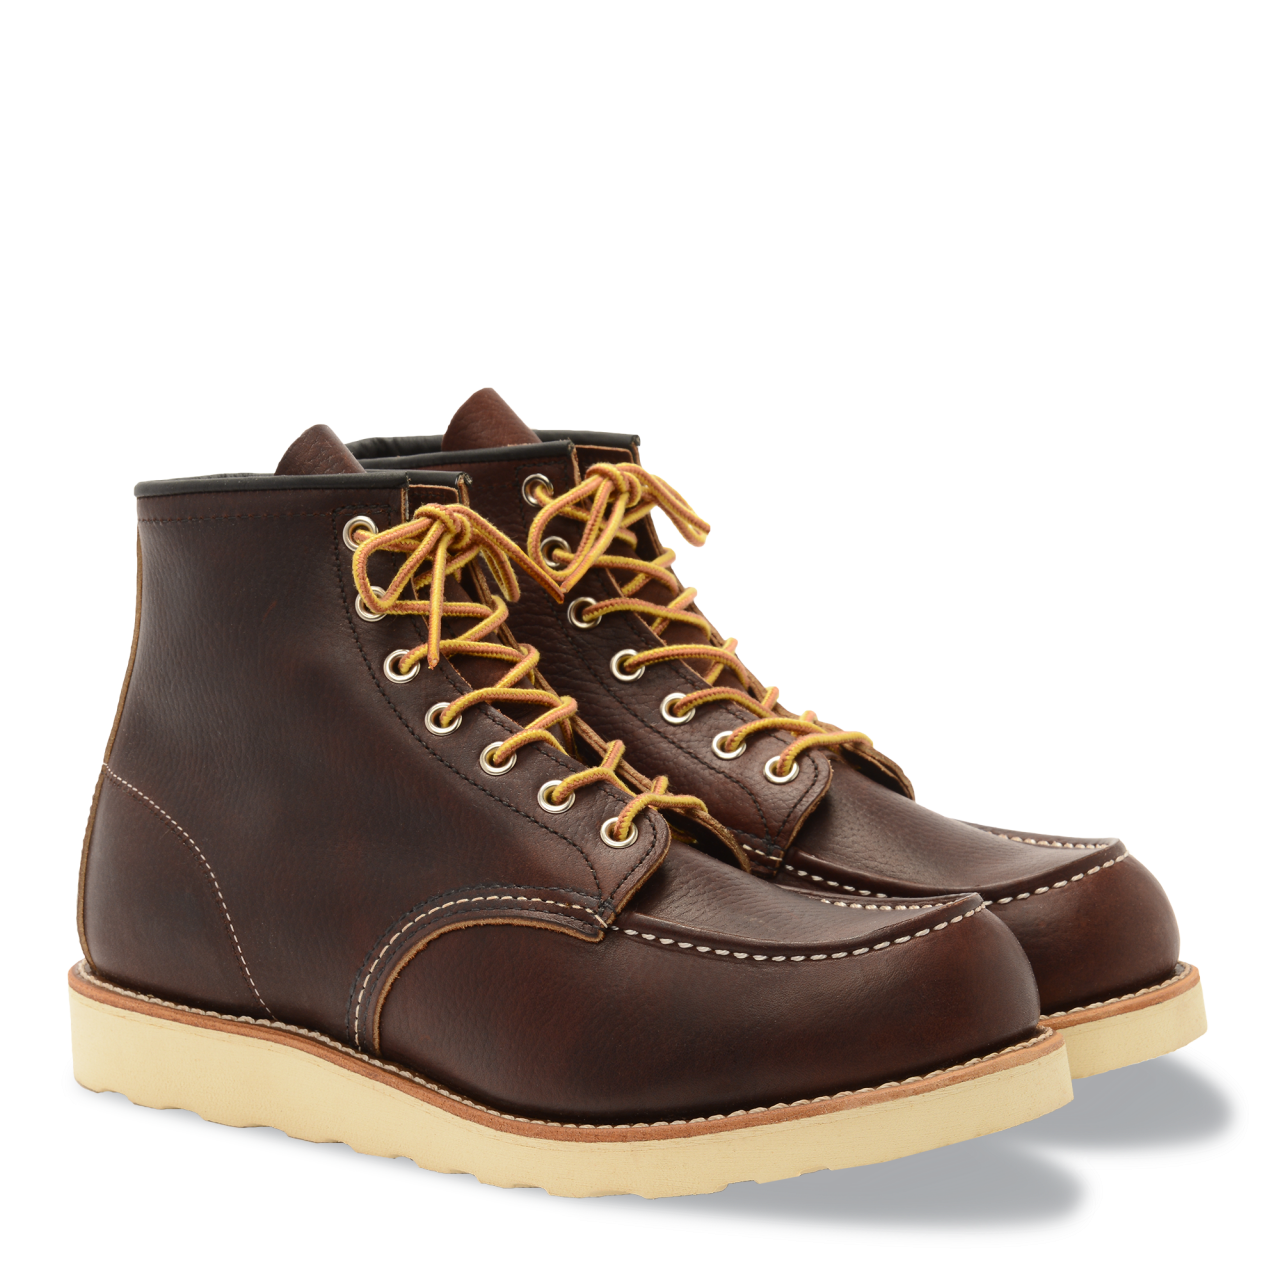 Red Wing 8138 Moc Toe